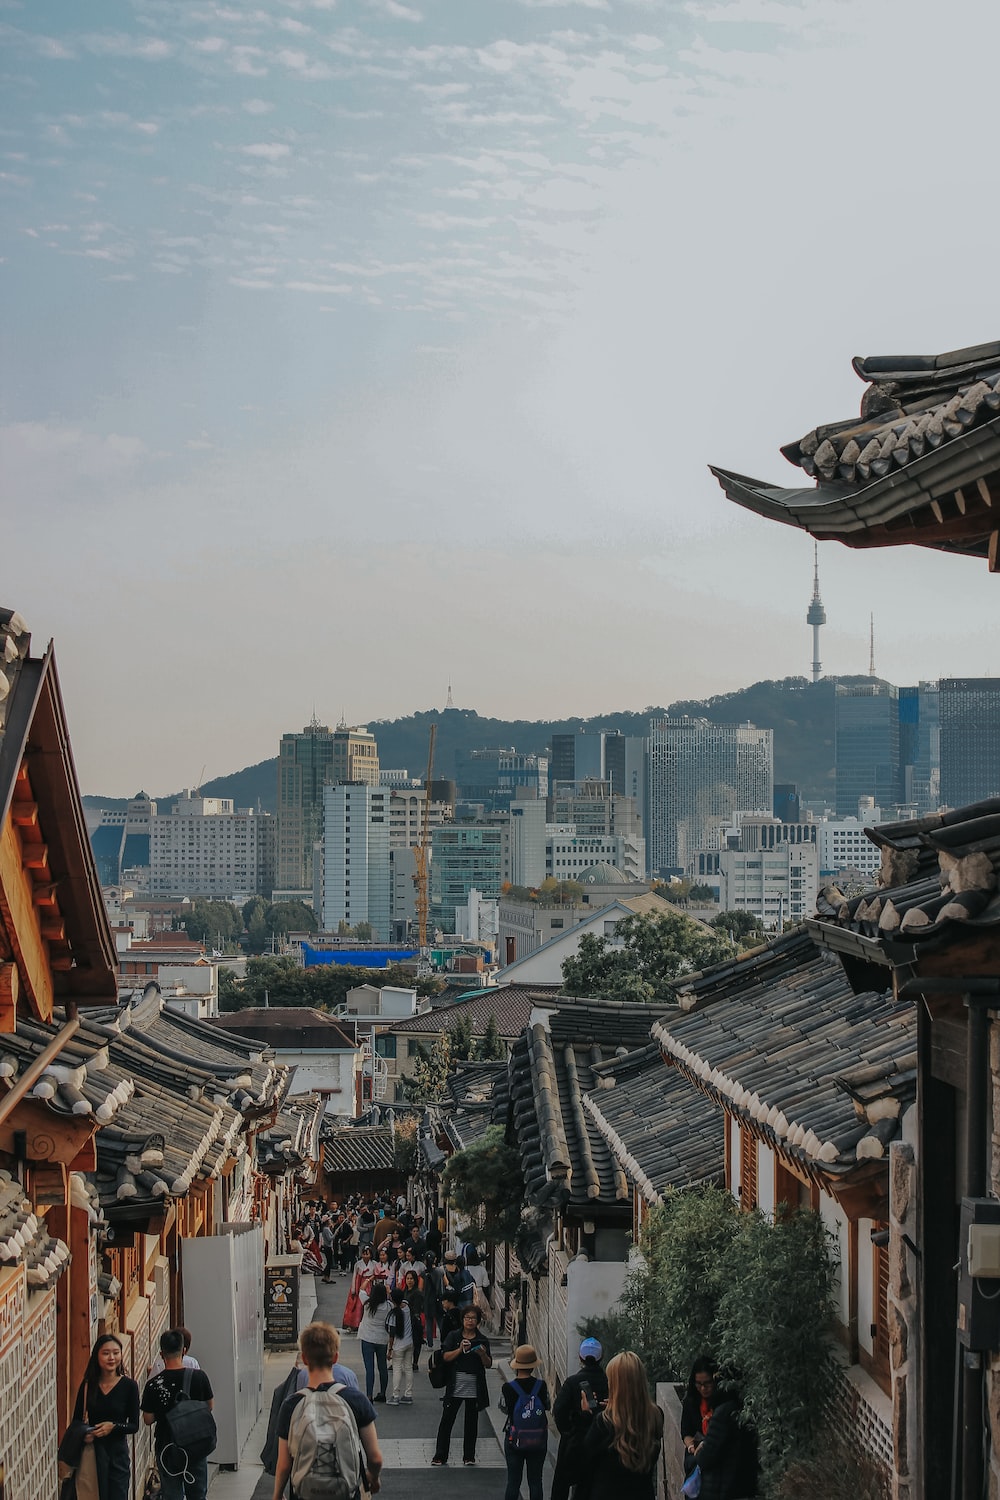 Seoul Picture. Download Free